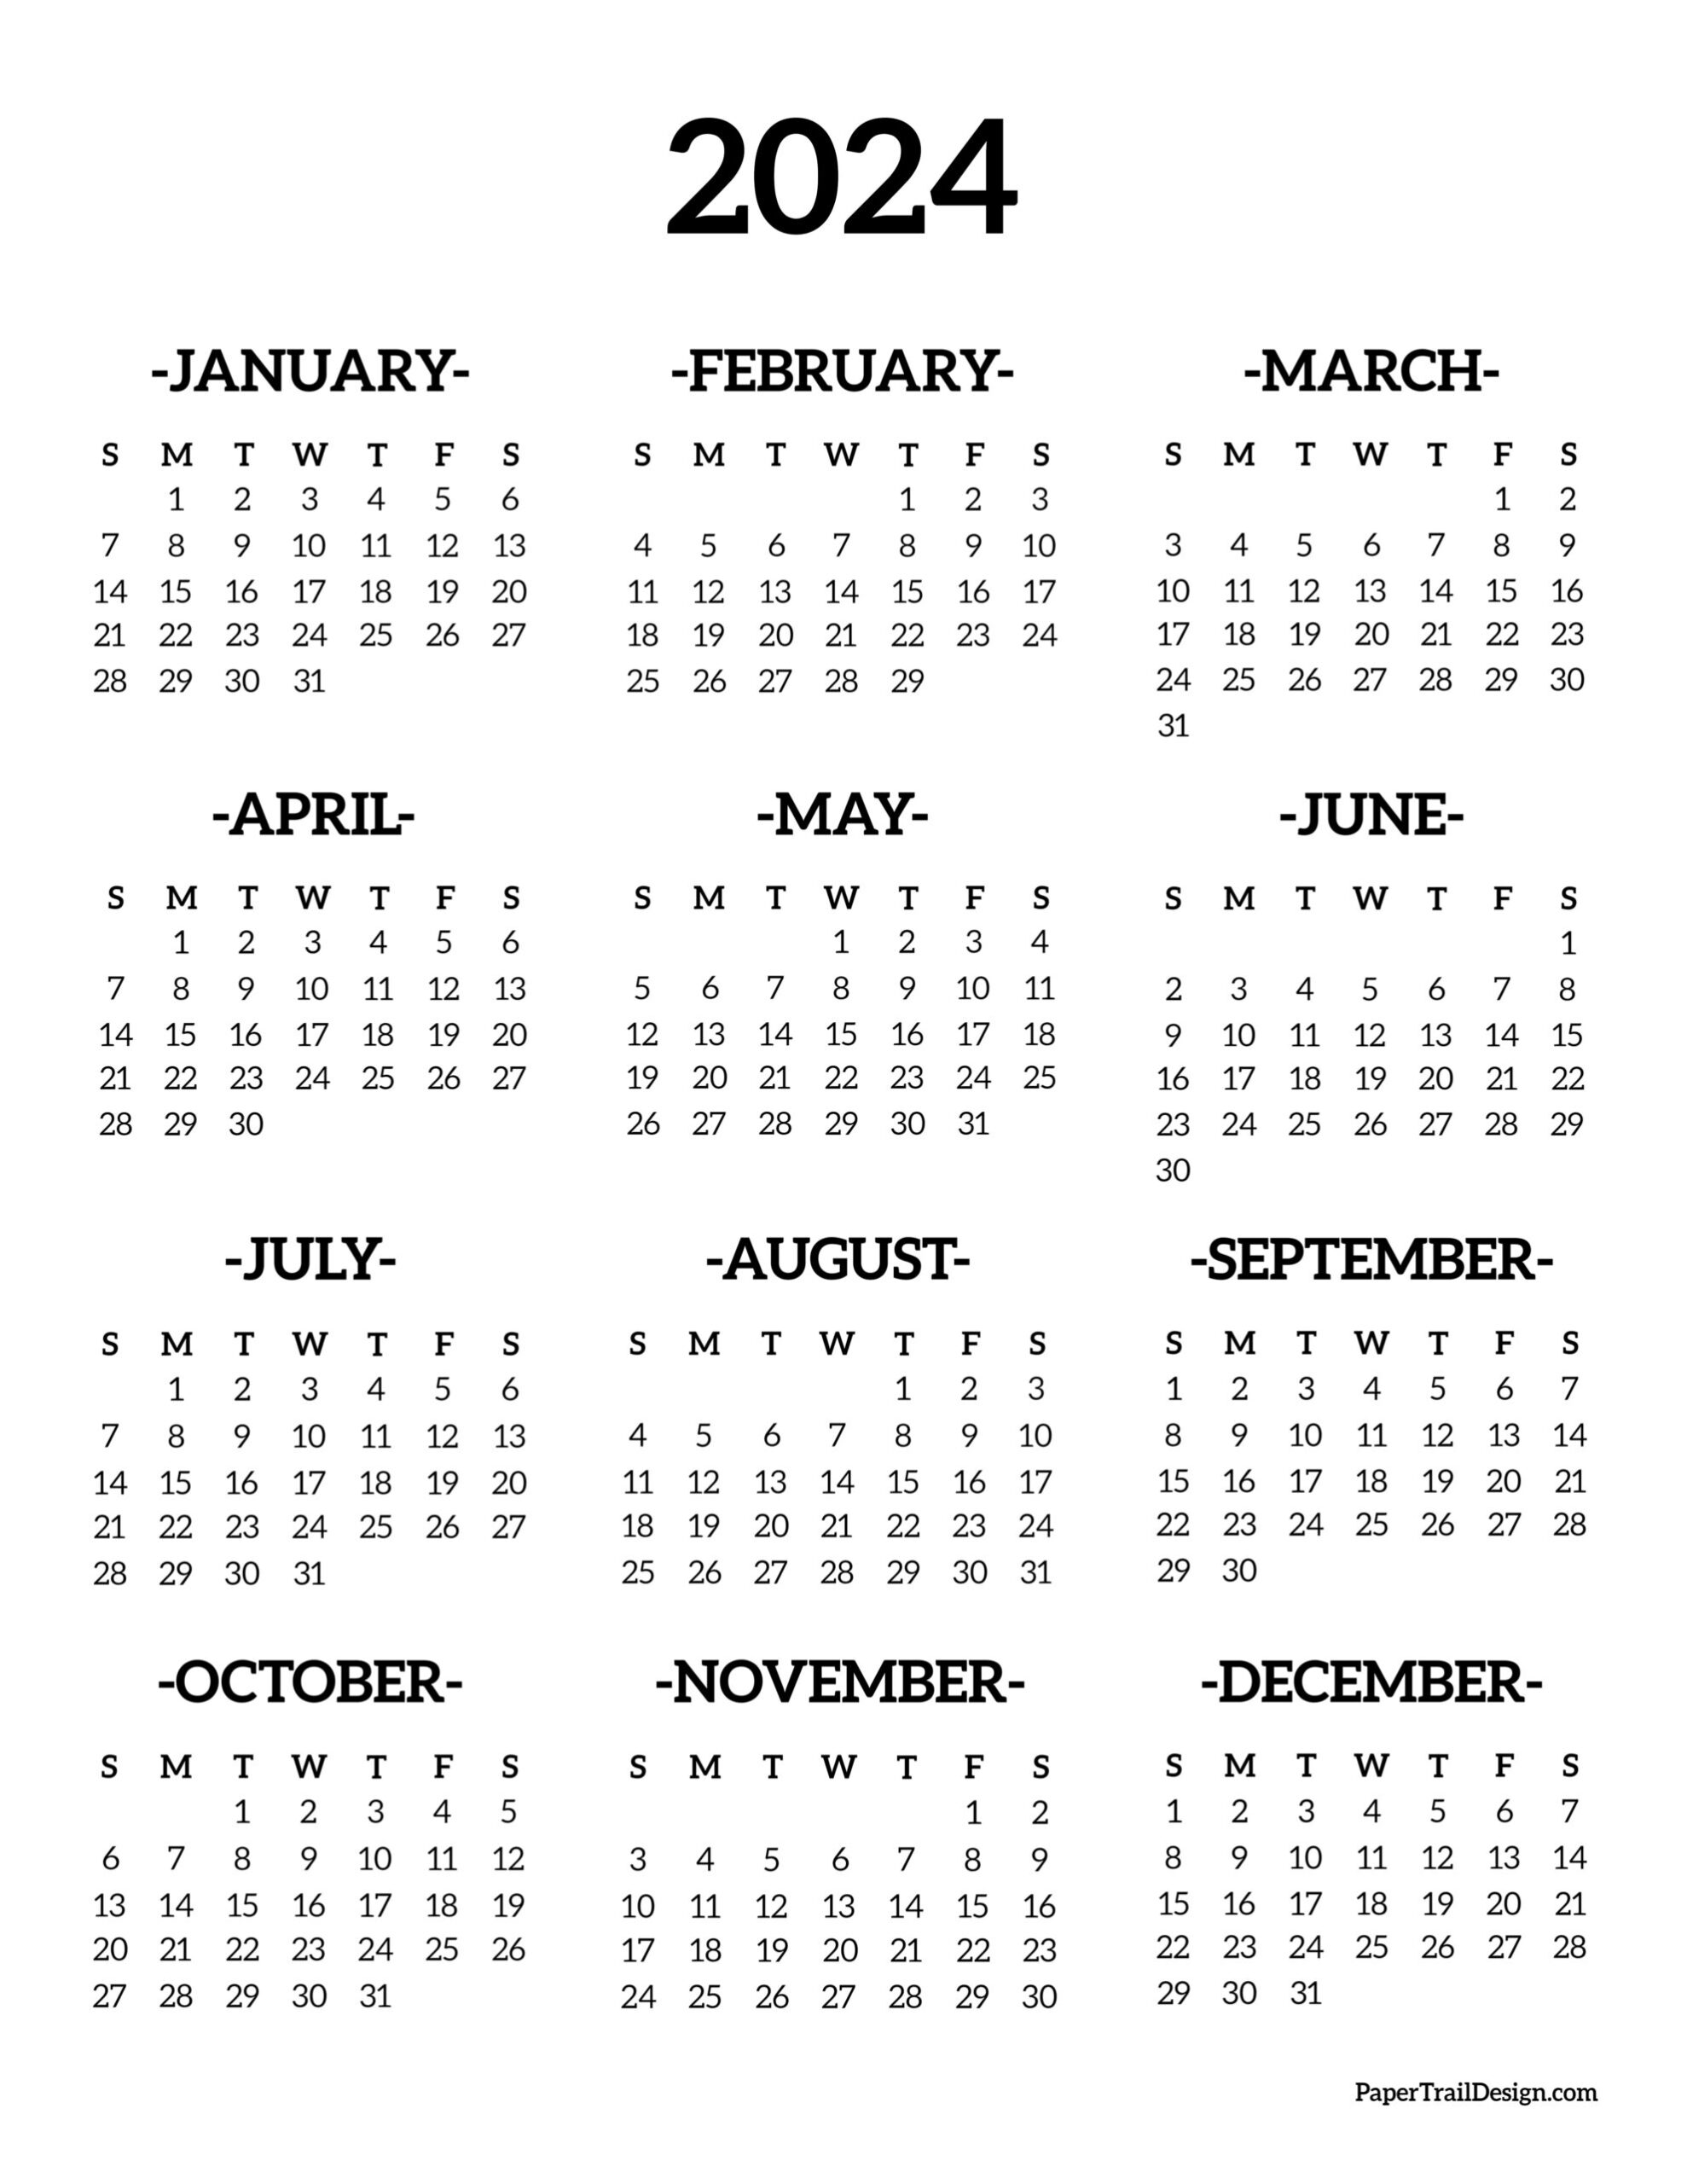 Calendar 2024 Printable One Page - Paper Trail Design for 2024 Calendar 1 Page Printable